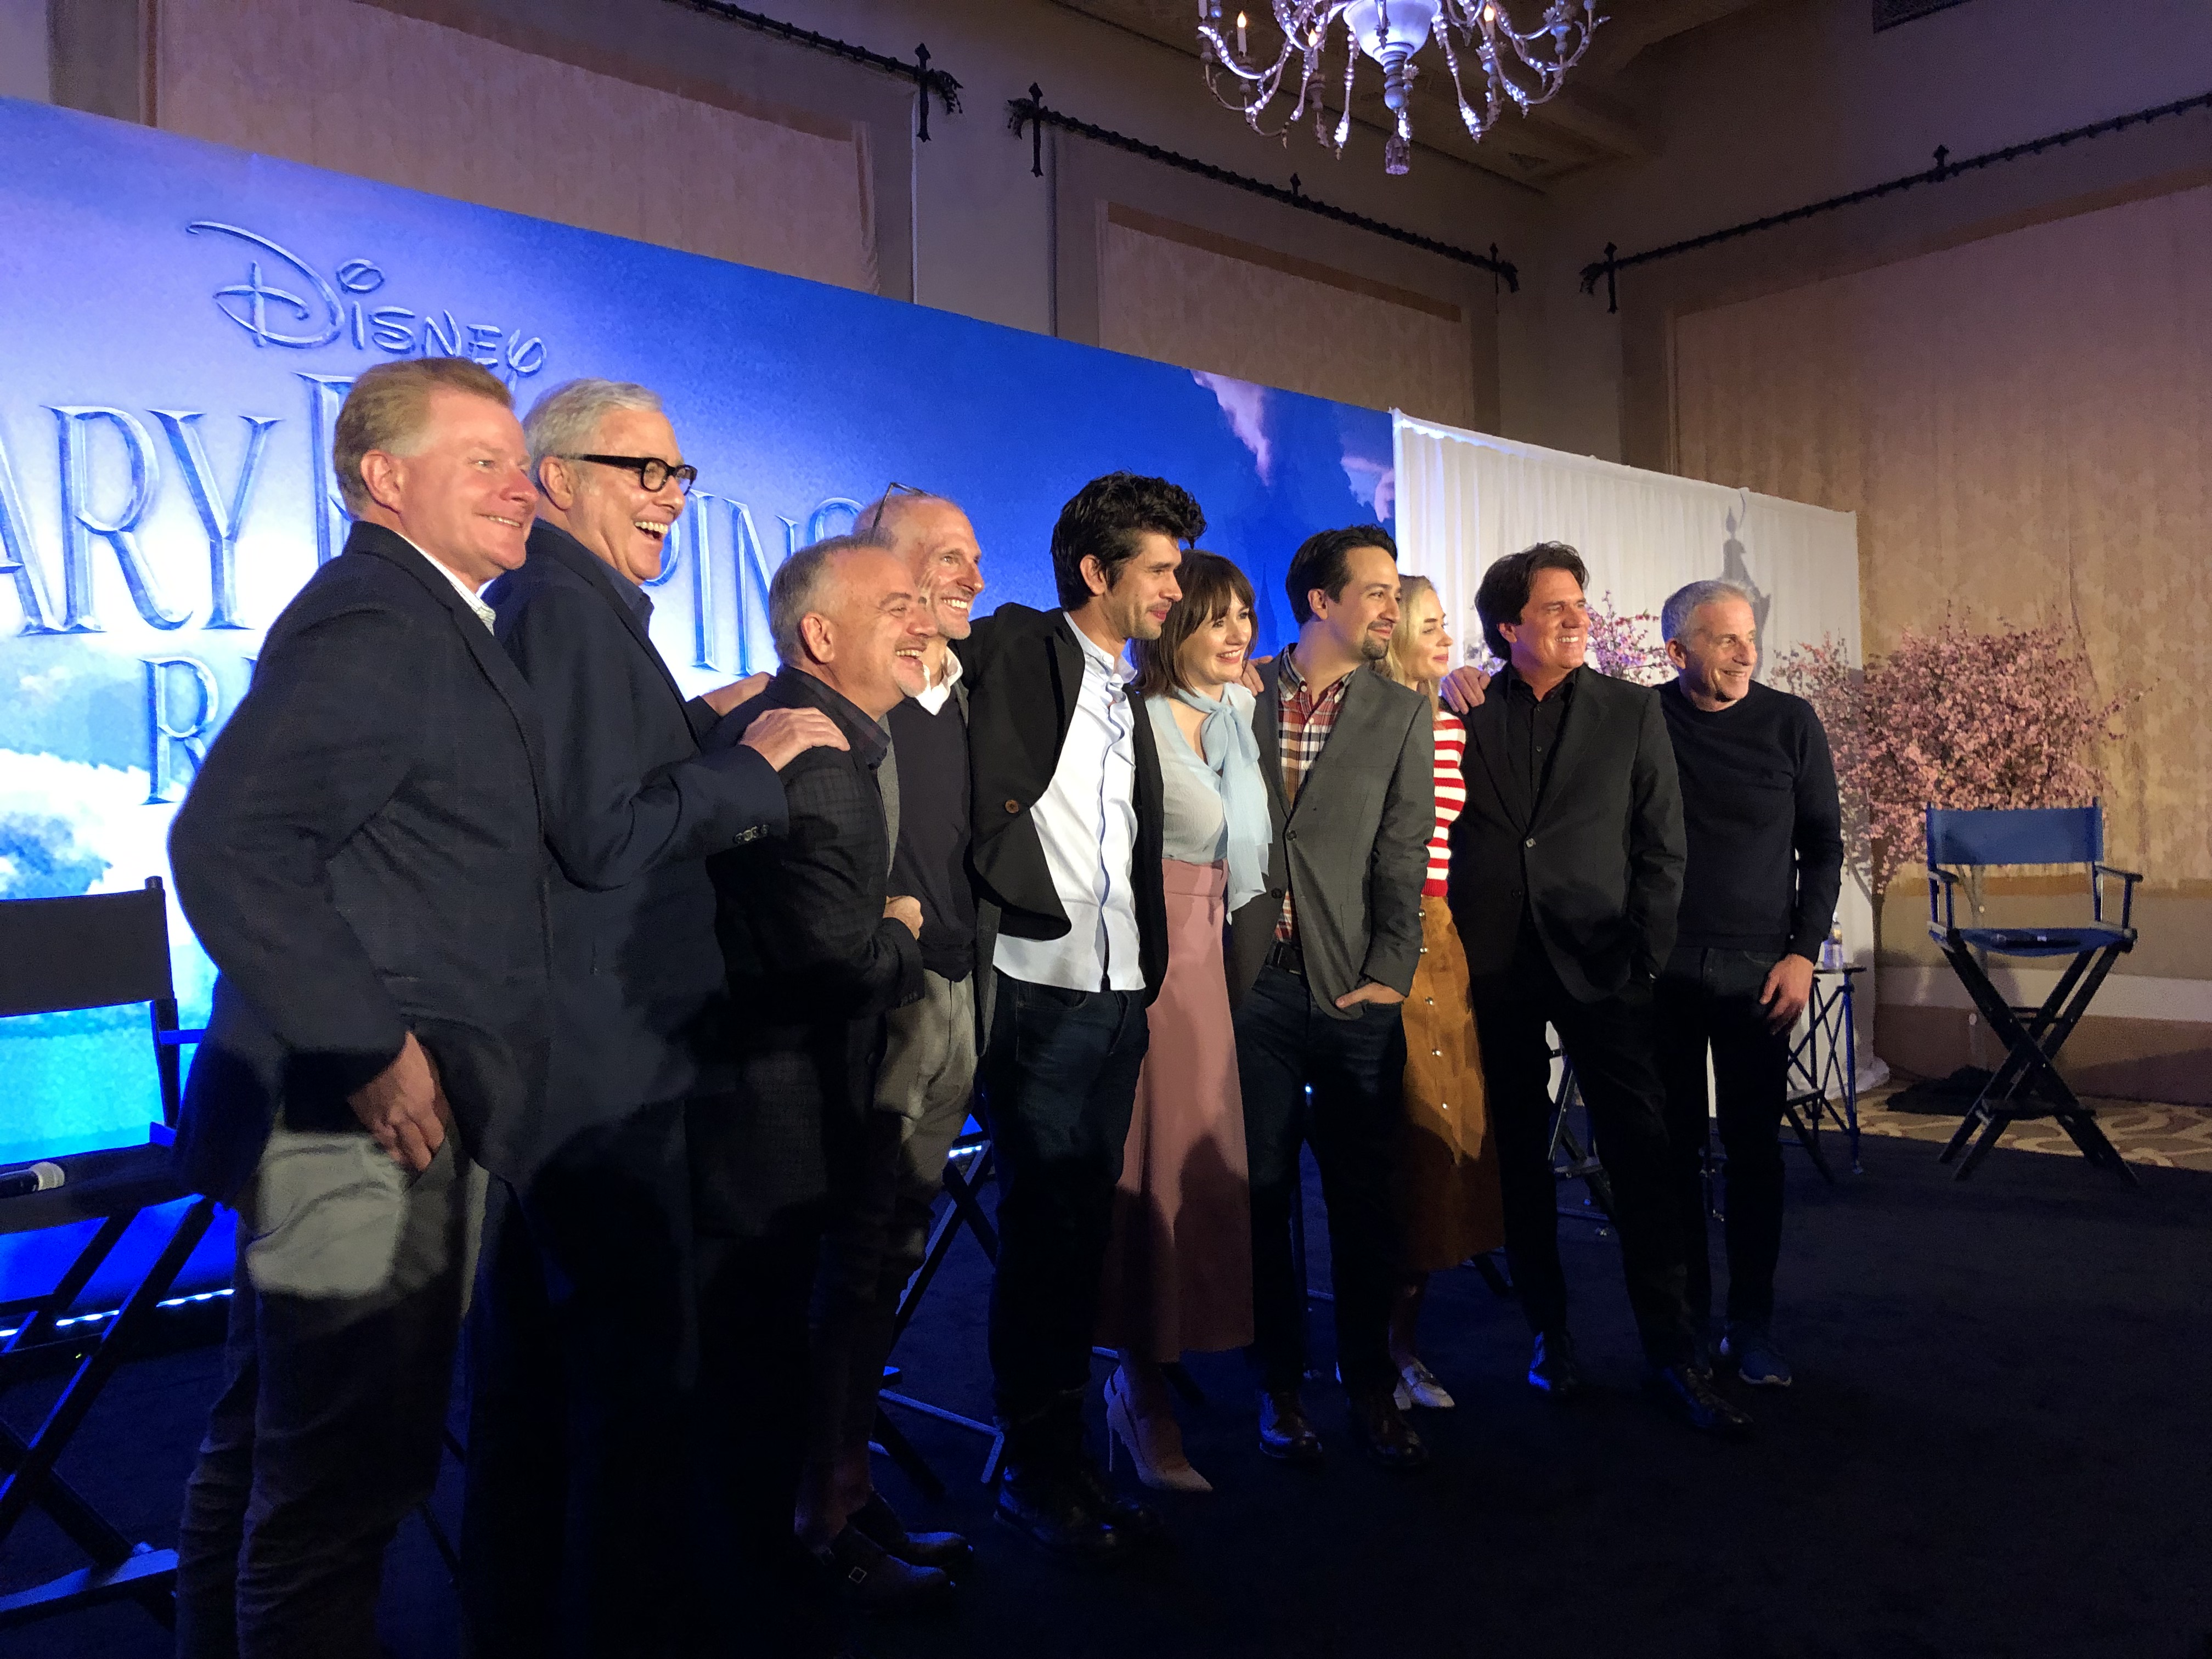 VIDEO: ‘Mary Poppins Returns’ Cast & Filmmakers Press Conference